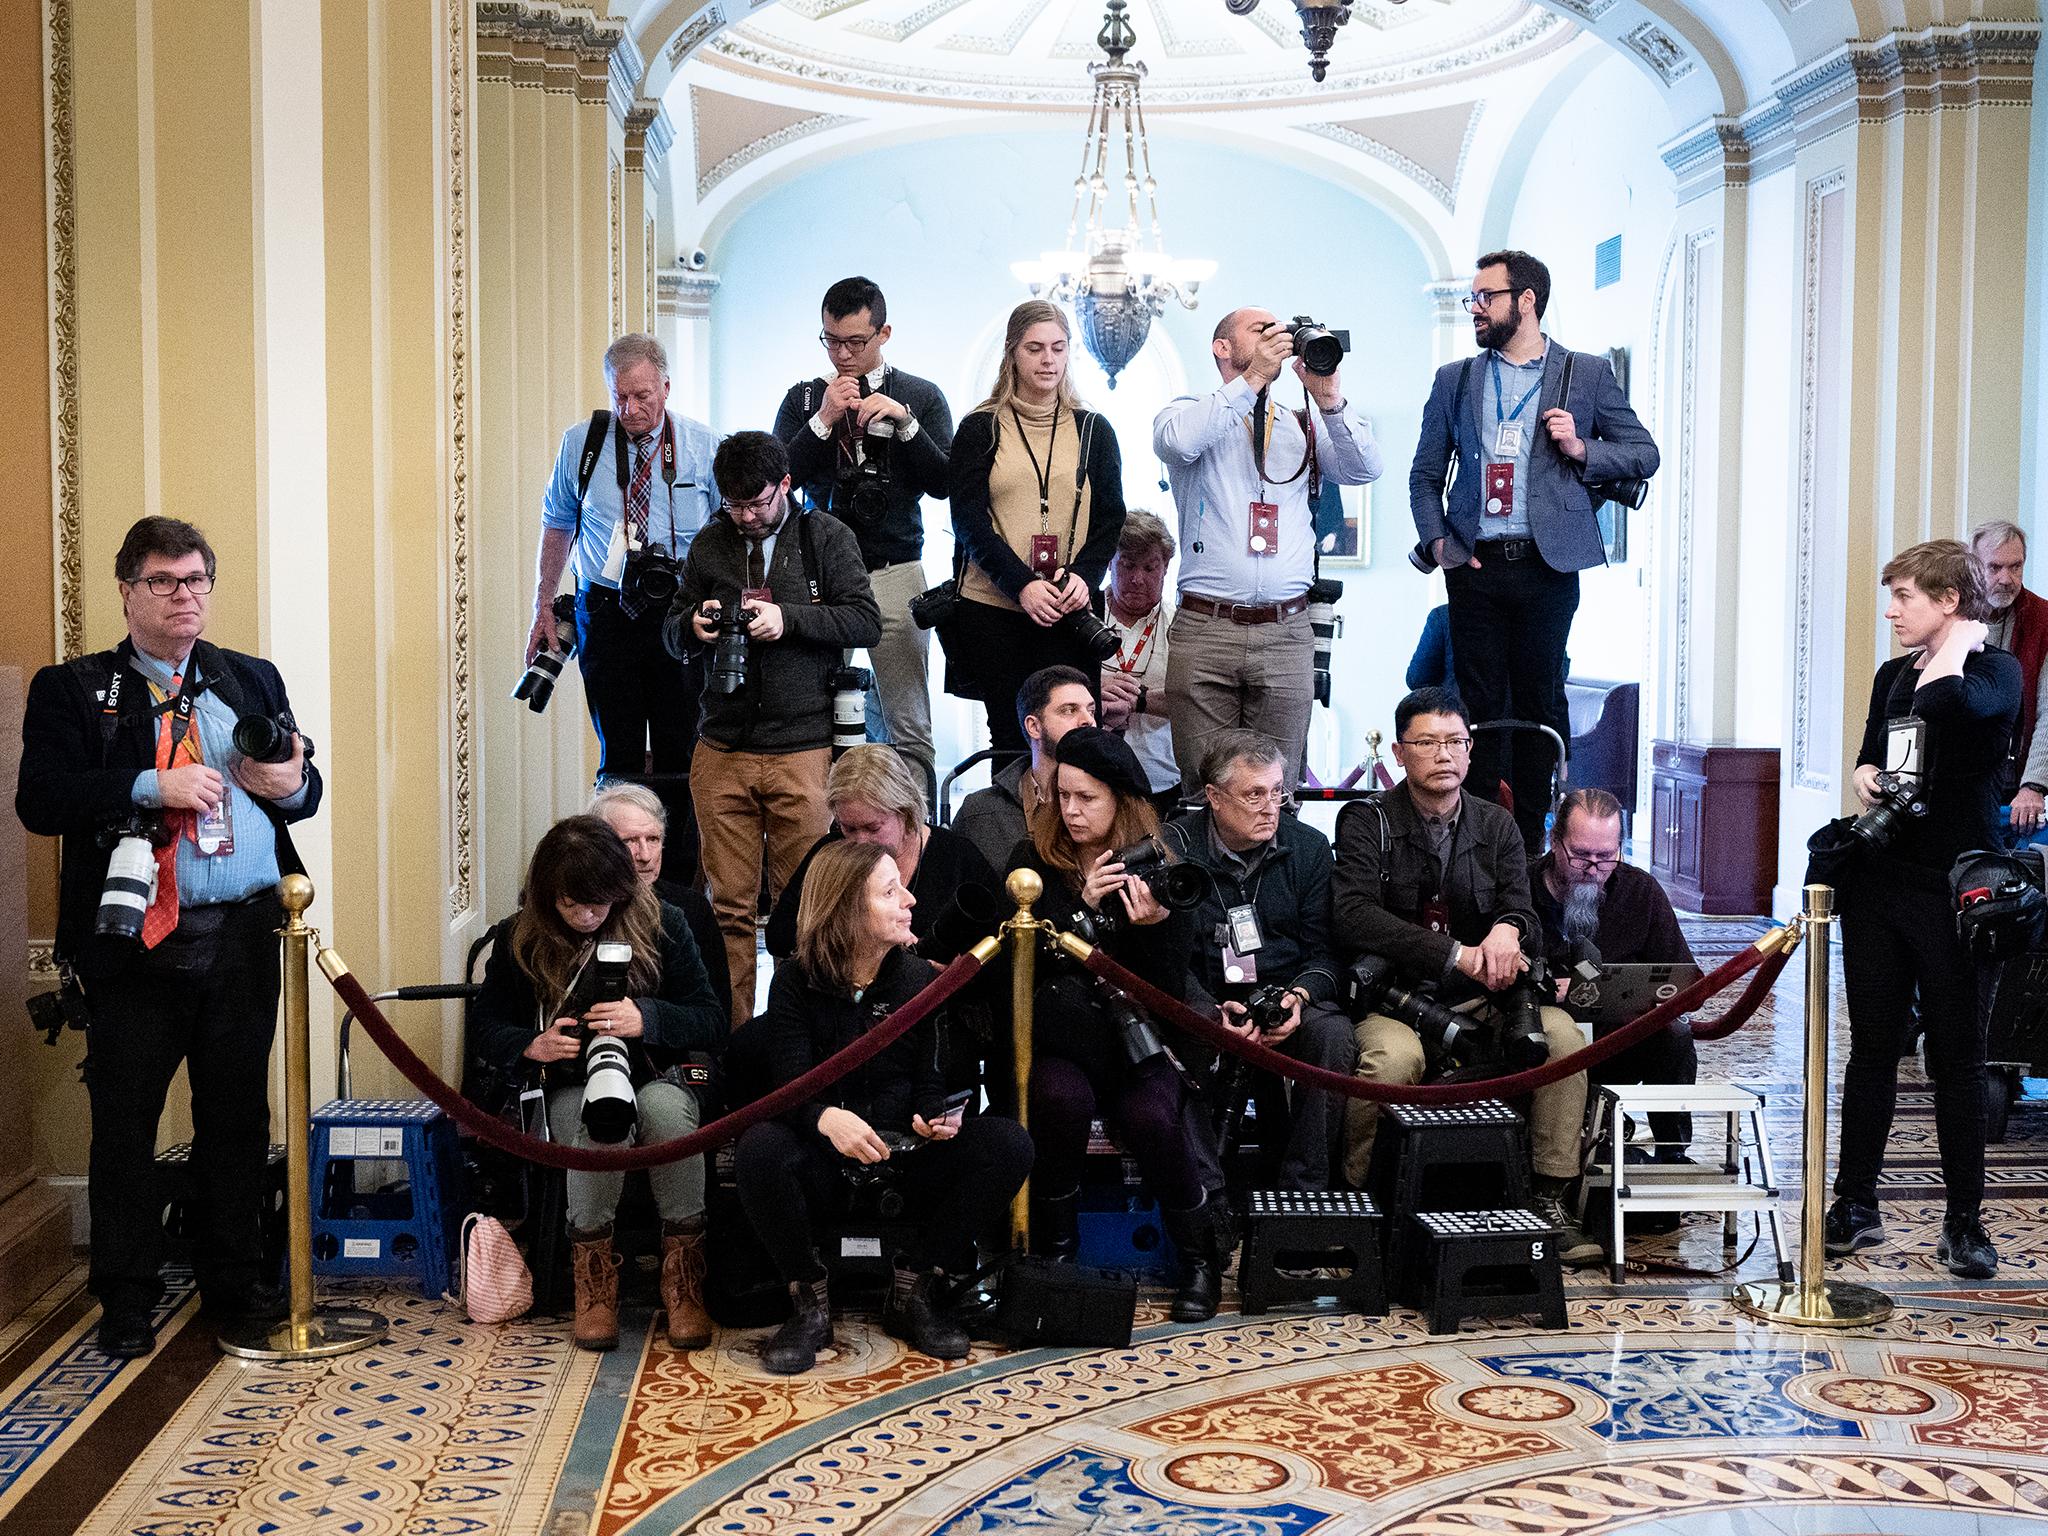 Press photographers covering the trial are confined to a small enclosure